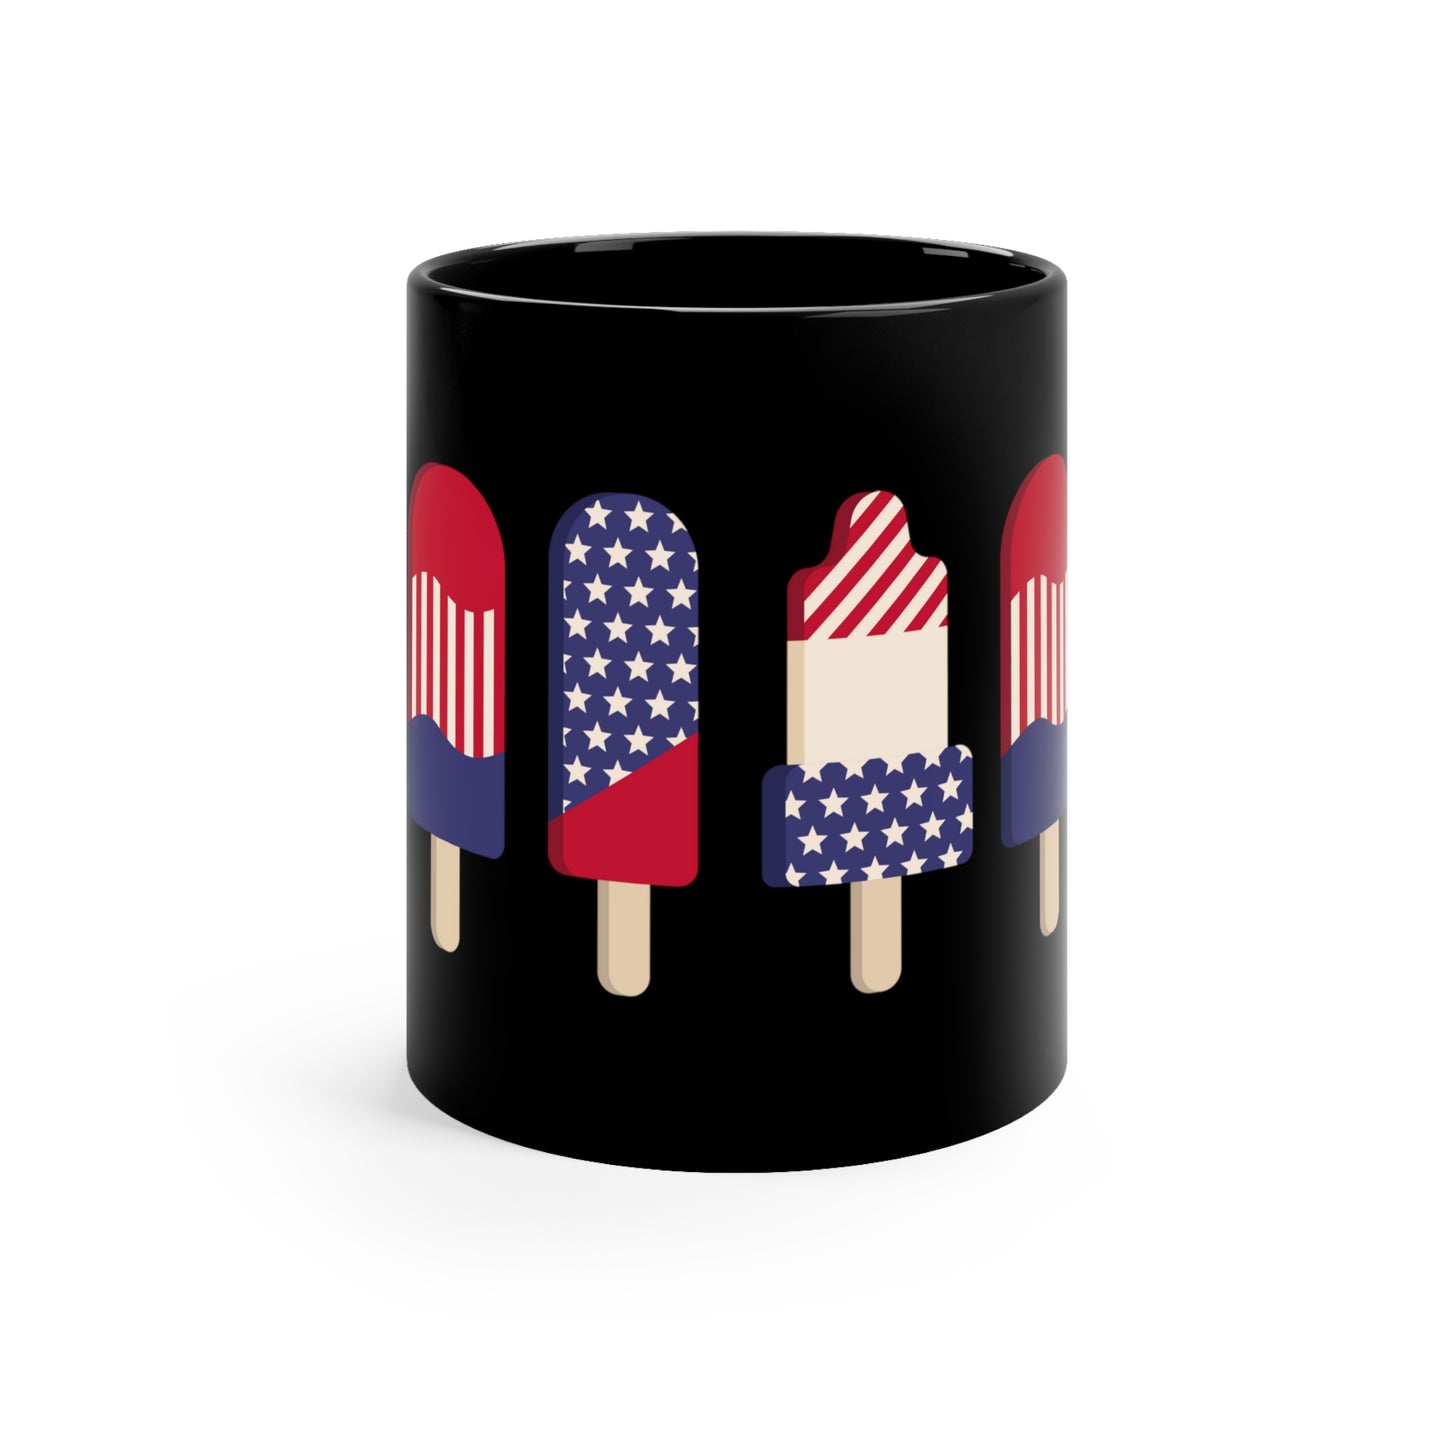 Patriotic American USA Popsicles Wrap Around Graphics On Black glossy 11 Oz Mug Fourth of July Father's Day Veterans Home or Boat Party